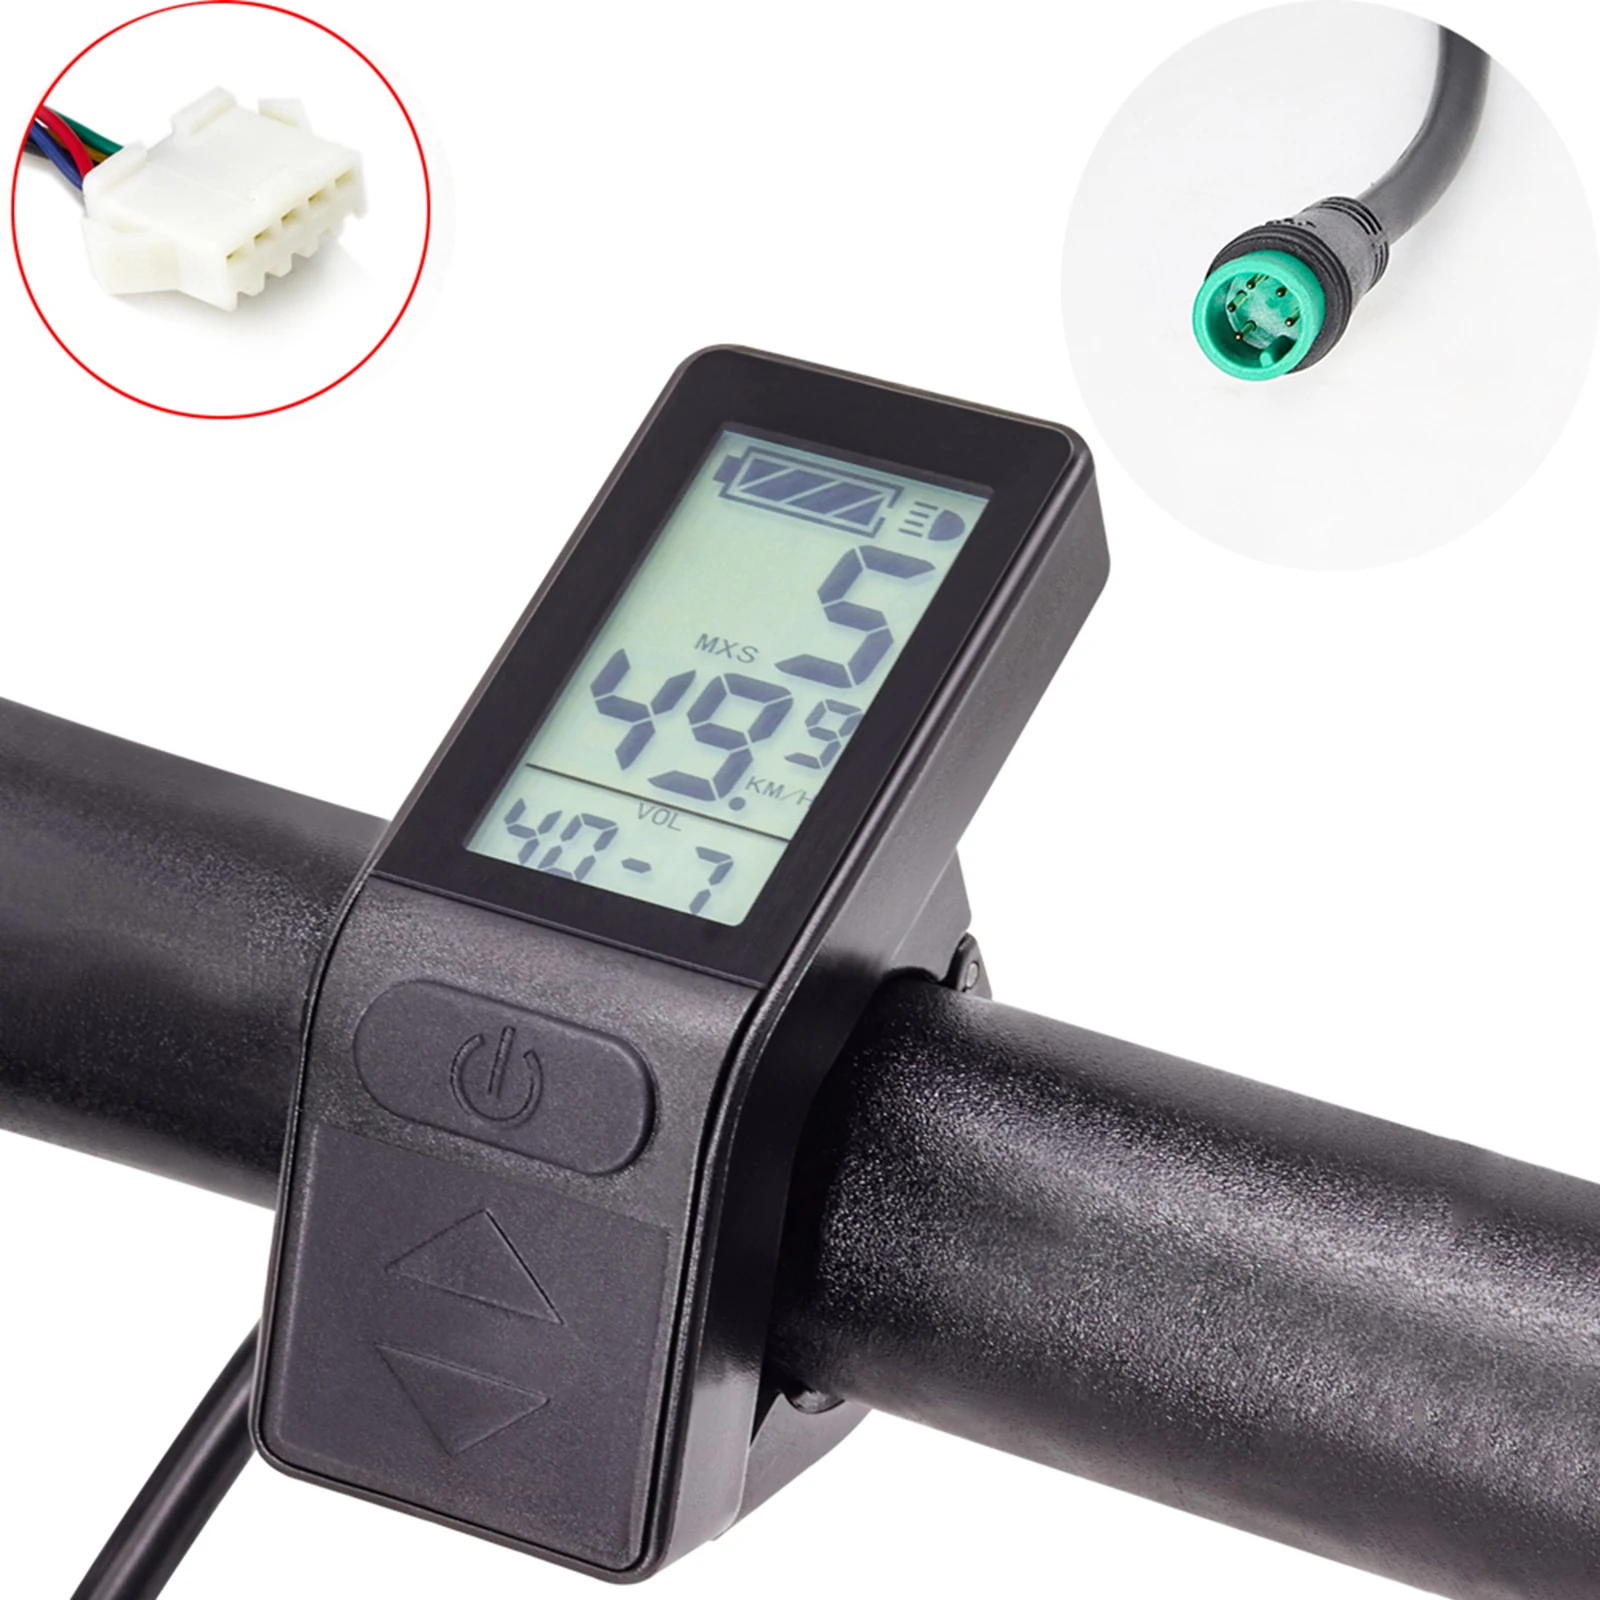 LCD Mini Electric Bike Display Waterproof Speed Controller For Motor E bicycle Conversion Kit